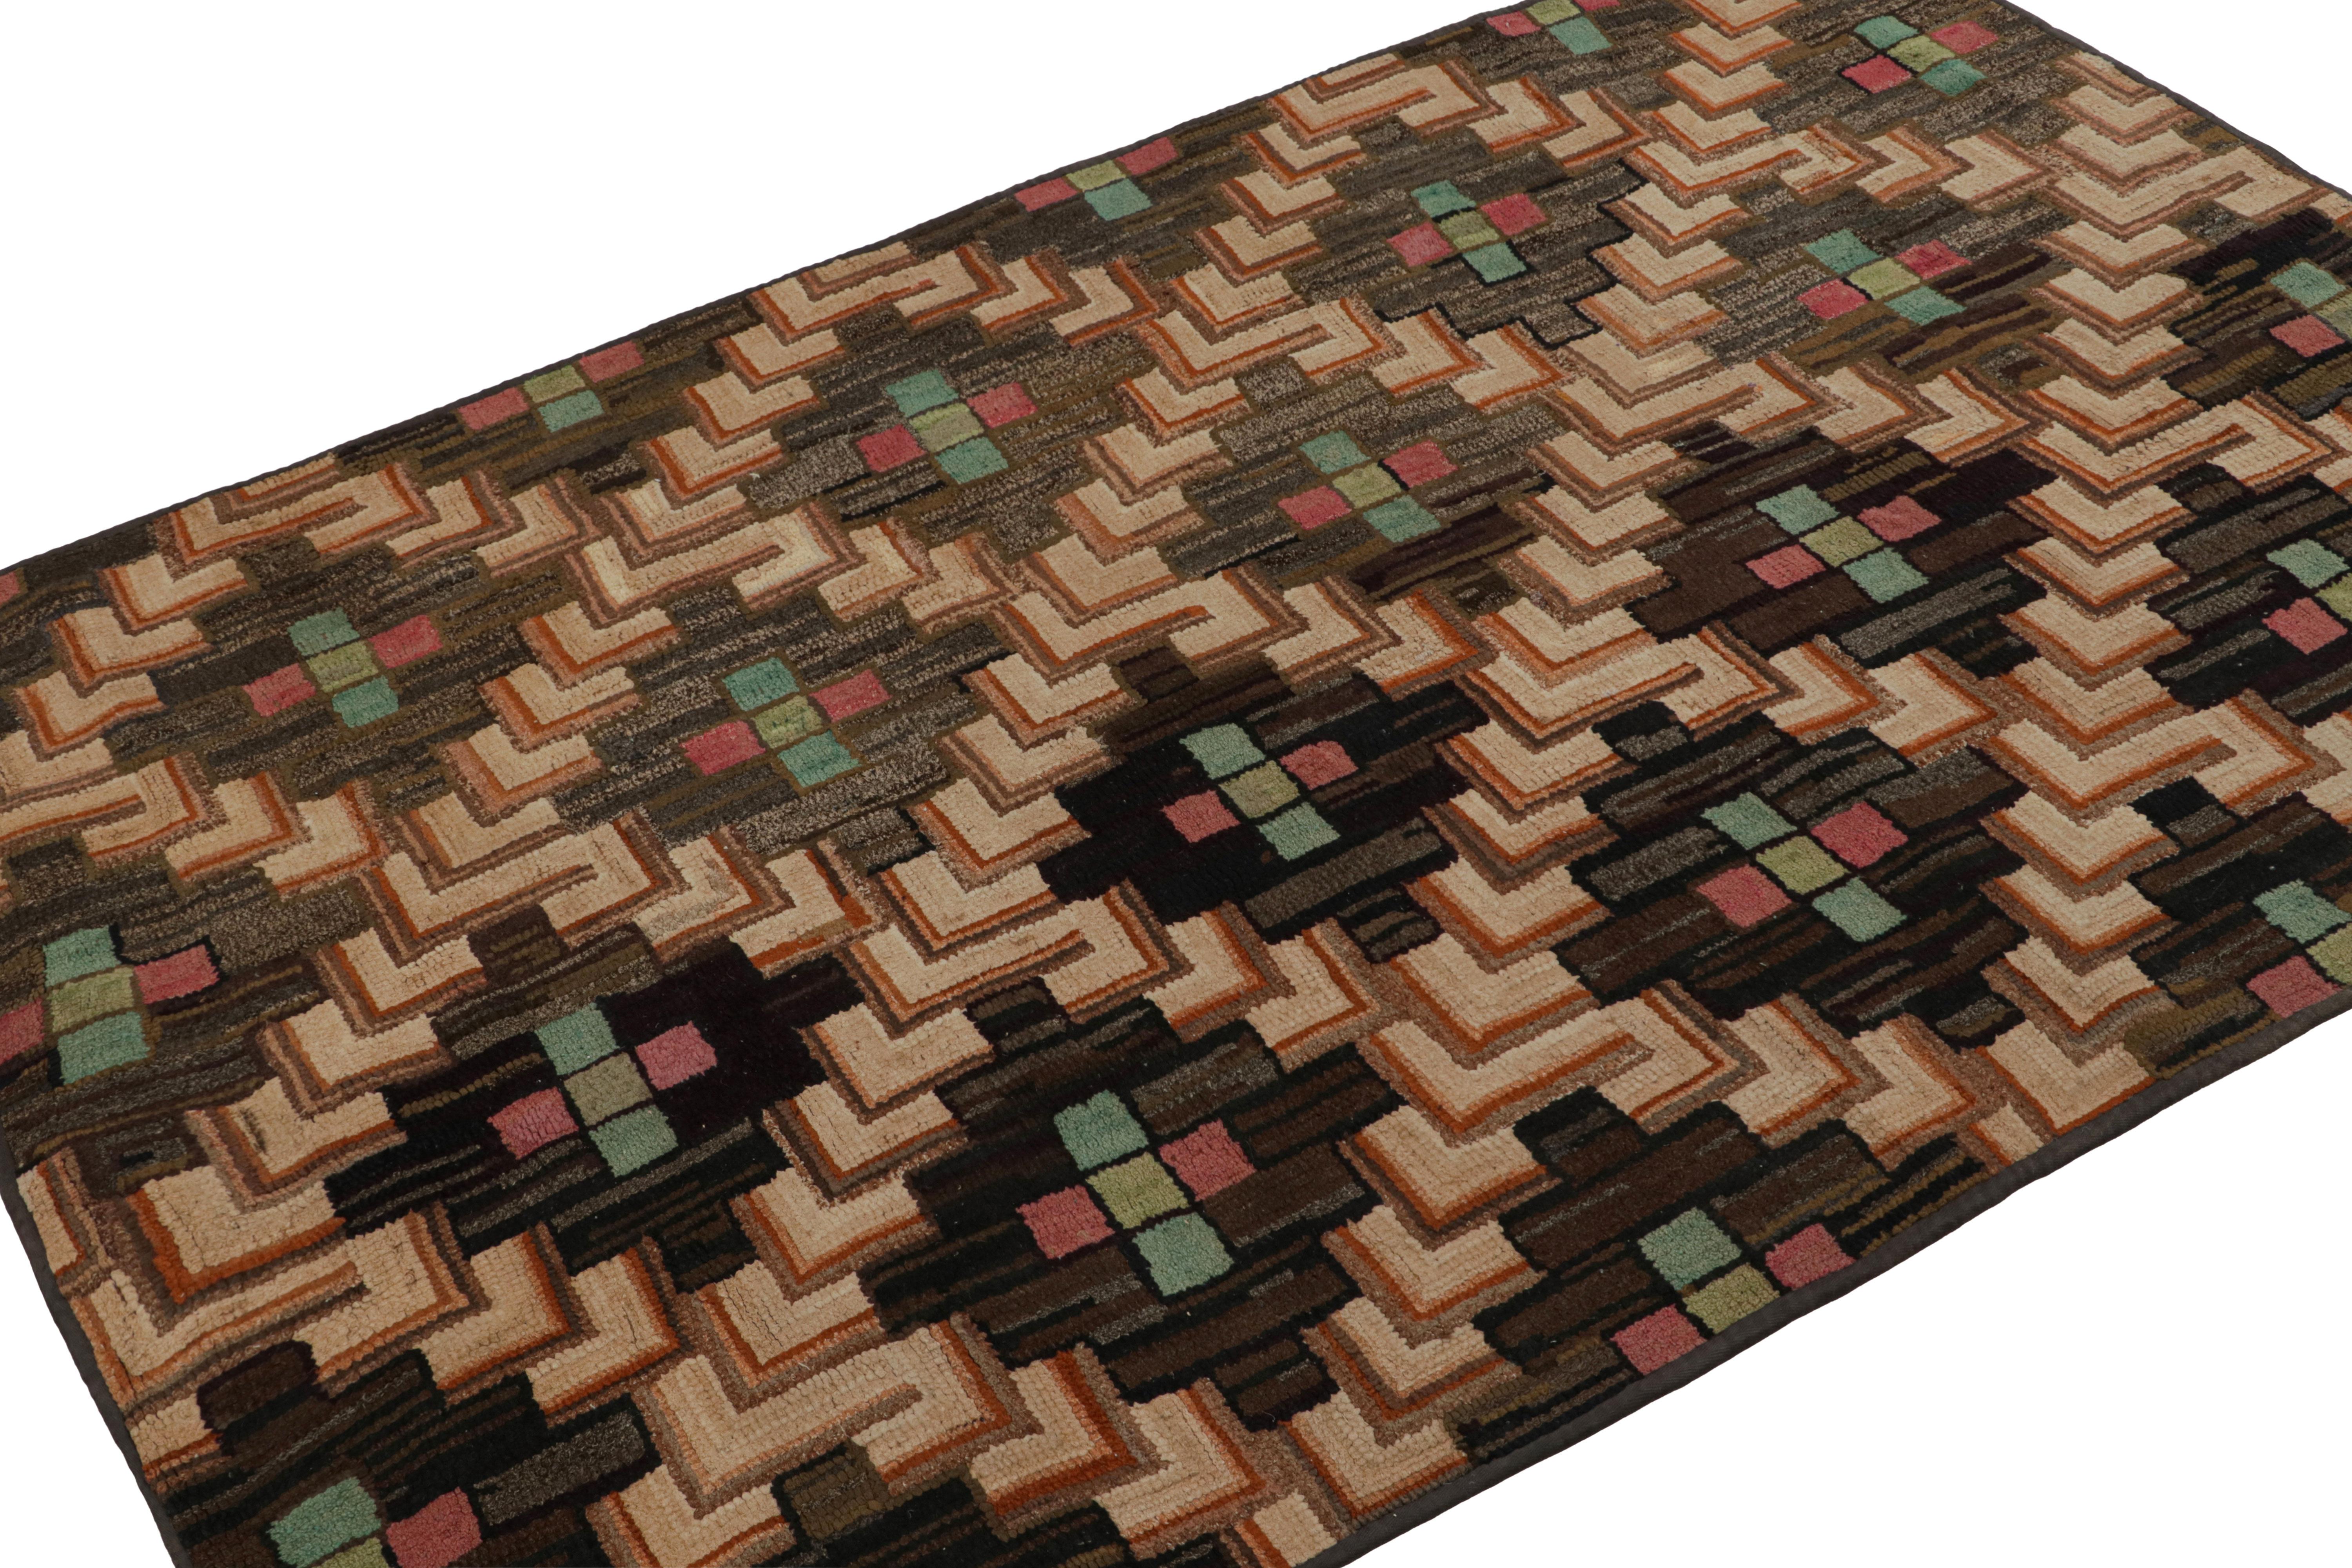 A rare 4x6 antique hooked rug of United States’ provenance, handmade in wool and fabric, circa 1920-1930, featuring polychromatic geometric patterns. 

On the Design: 

This collectible piece enjoys geometric patterns in a polychromatic colorway.